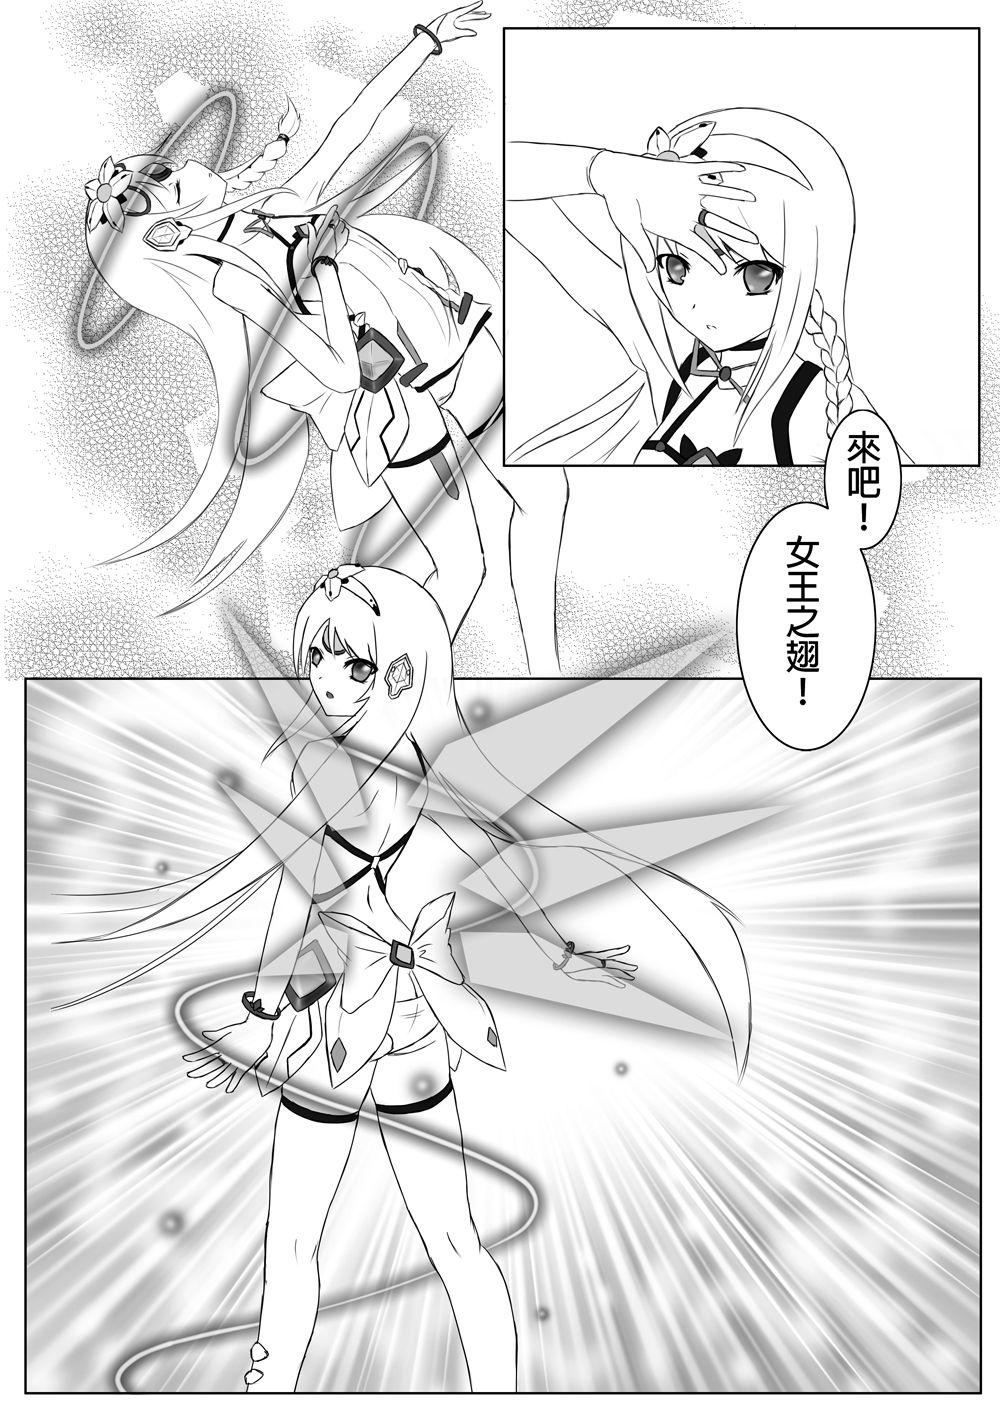 Shecock 人間遊戯 - Elsword Perverted - Page 4